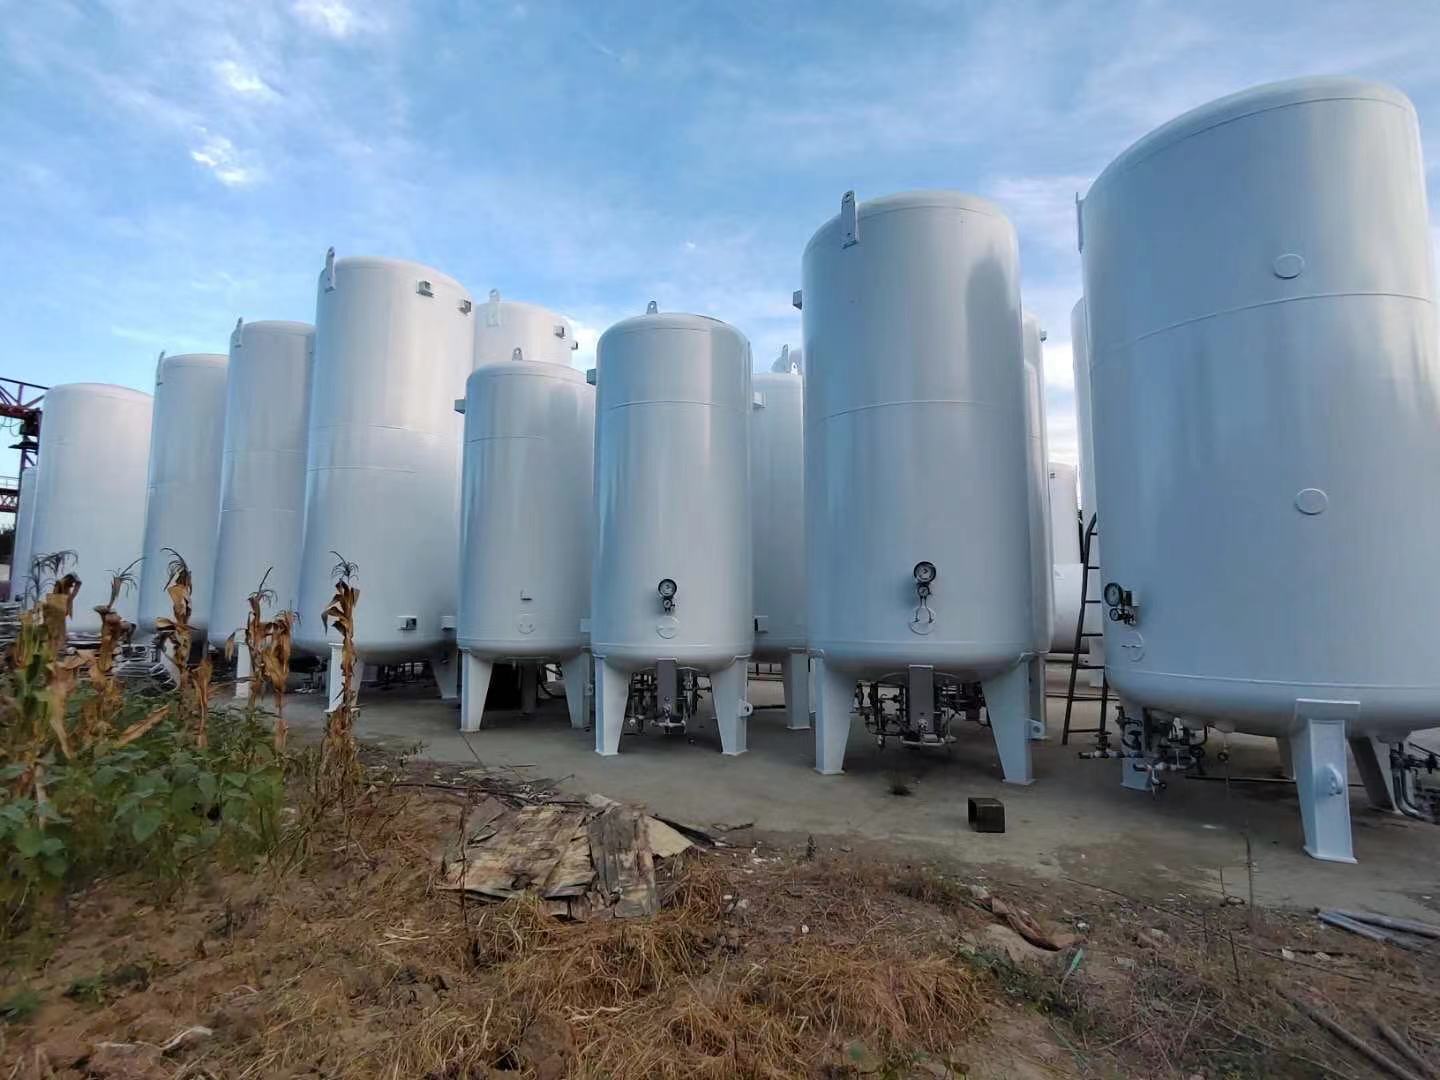 Precautions for using storage tanks after a disaster